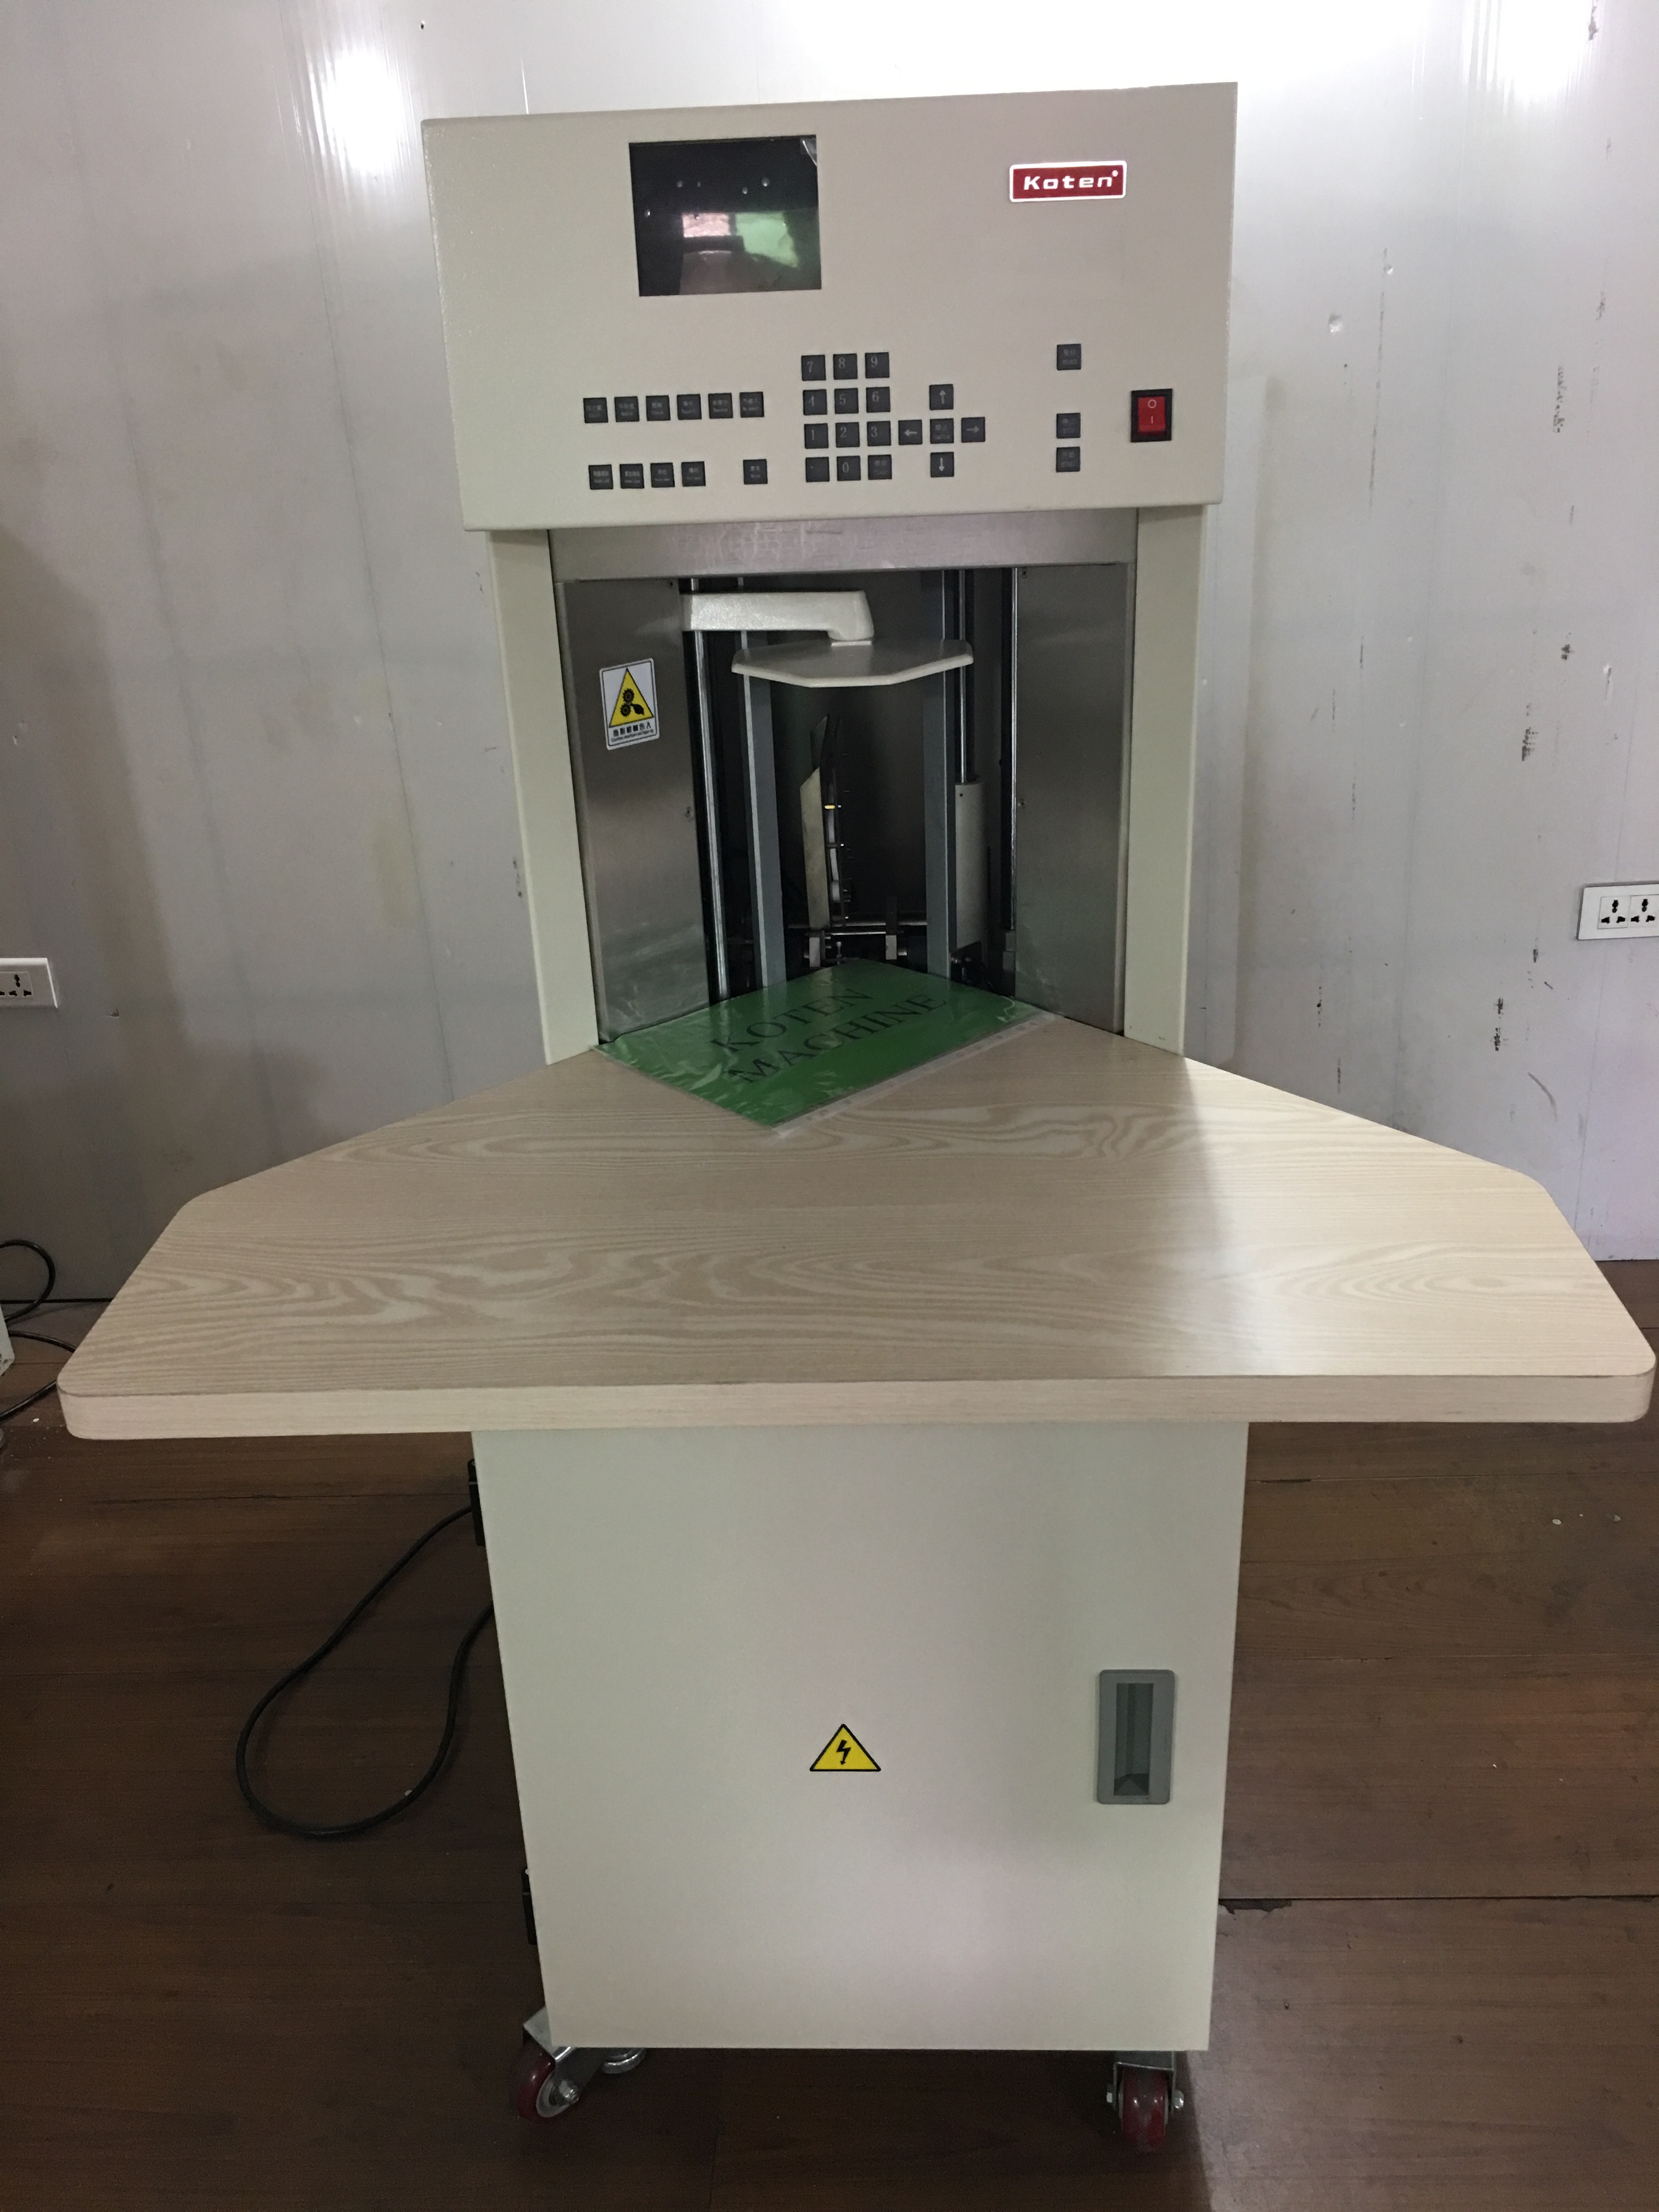 Automatic Paper Counting Machine Model SZJ-800